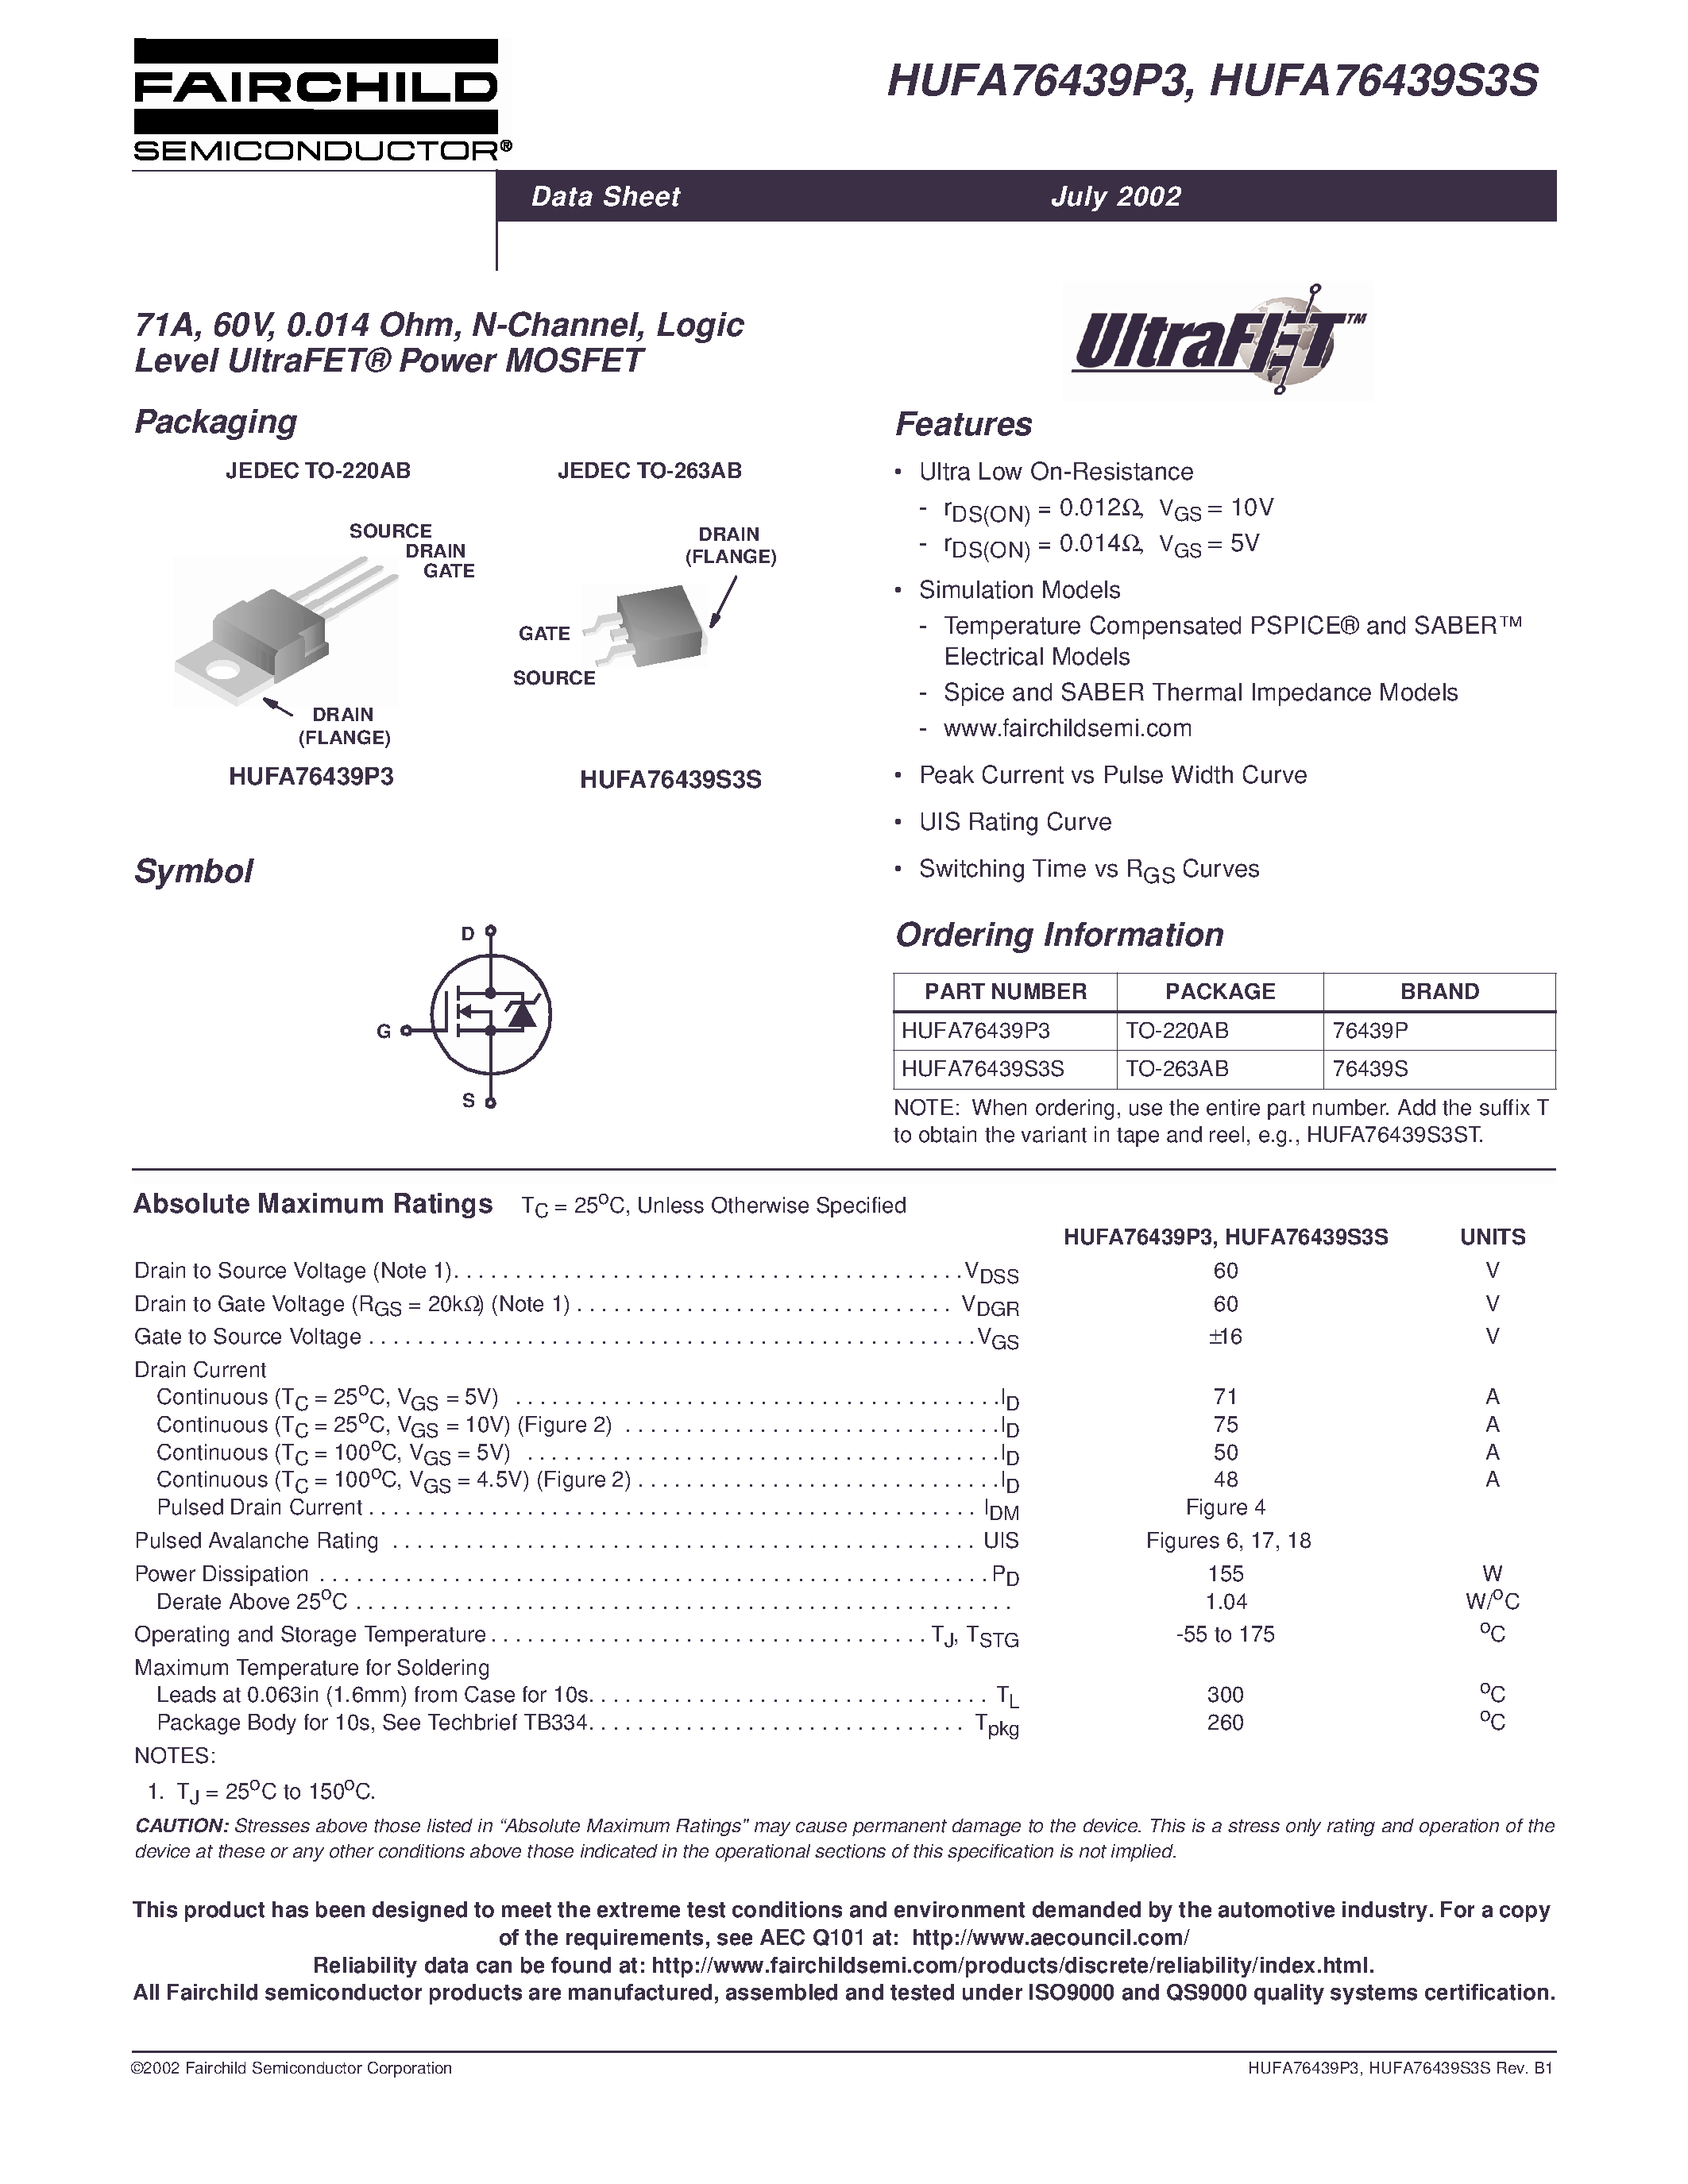 Datasheet HUFA76439P3 - 71A/ 60V/ 0.014 Ohm/ N-Channel/ Logic Level UltraFET Power MOSFET page 1